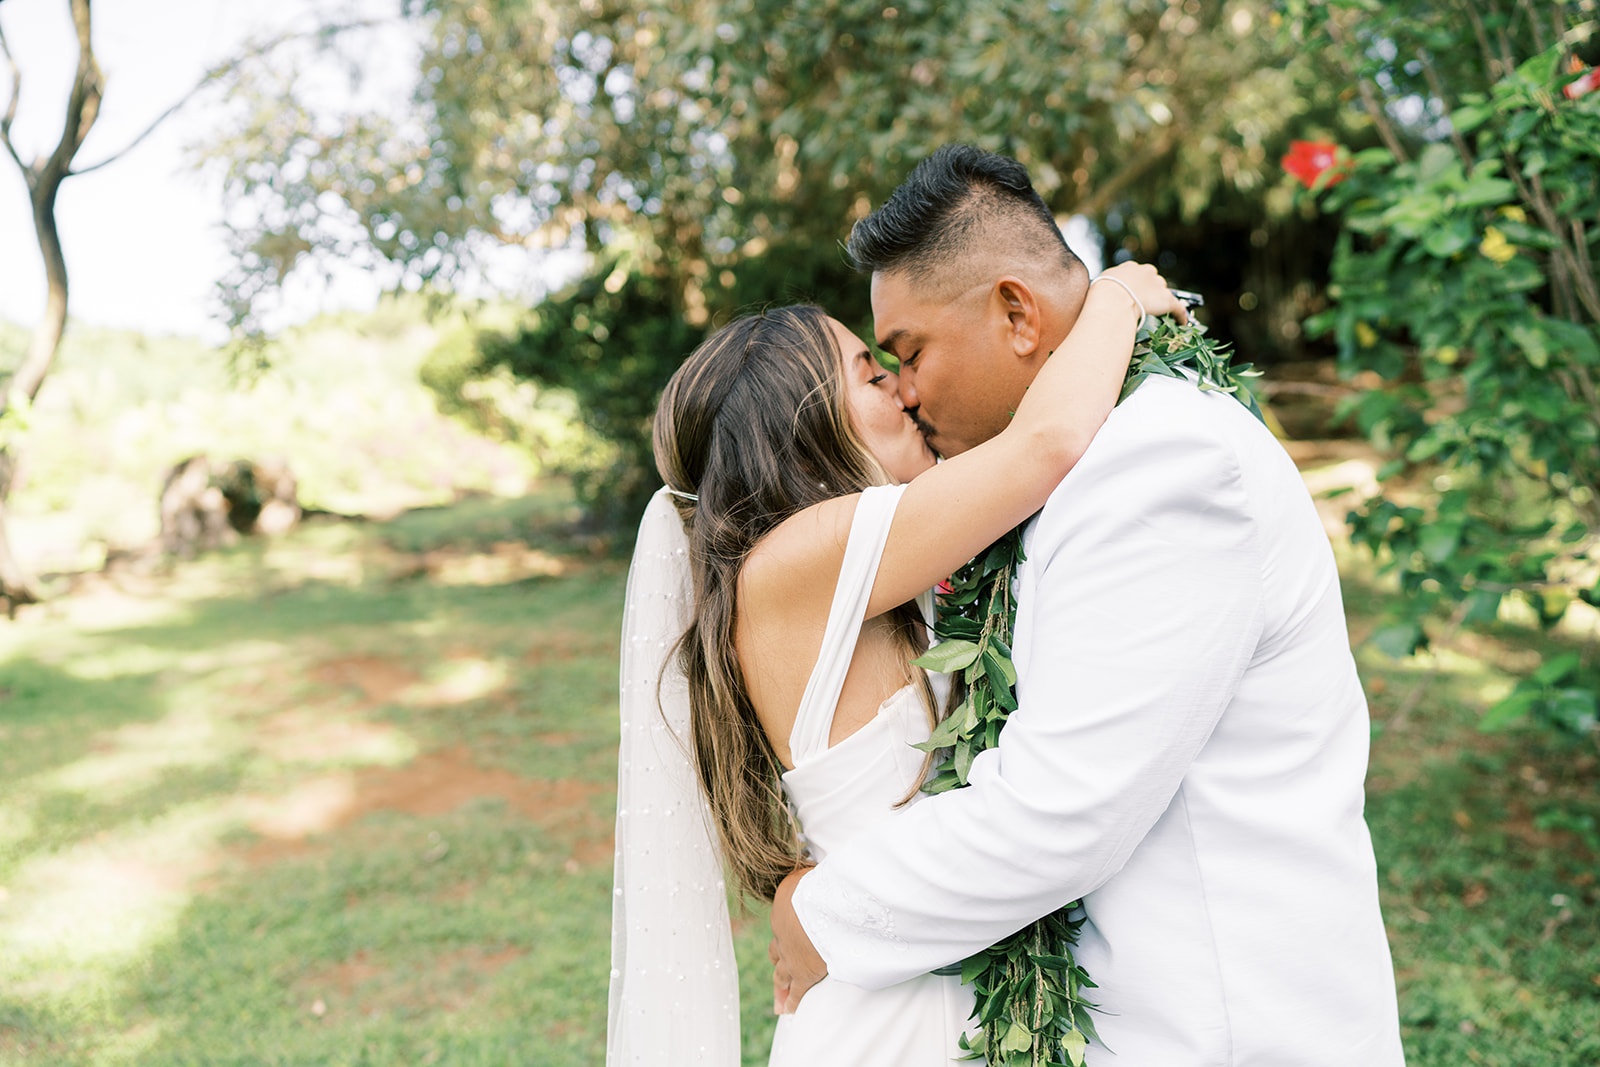 A couple embracing and kissing on their wedding day outdoors in Kauai